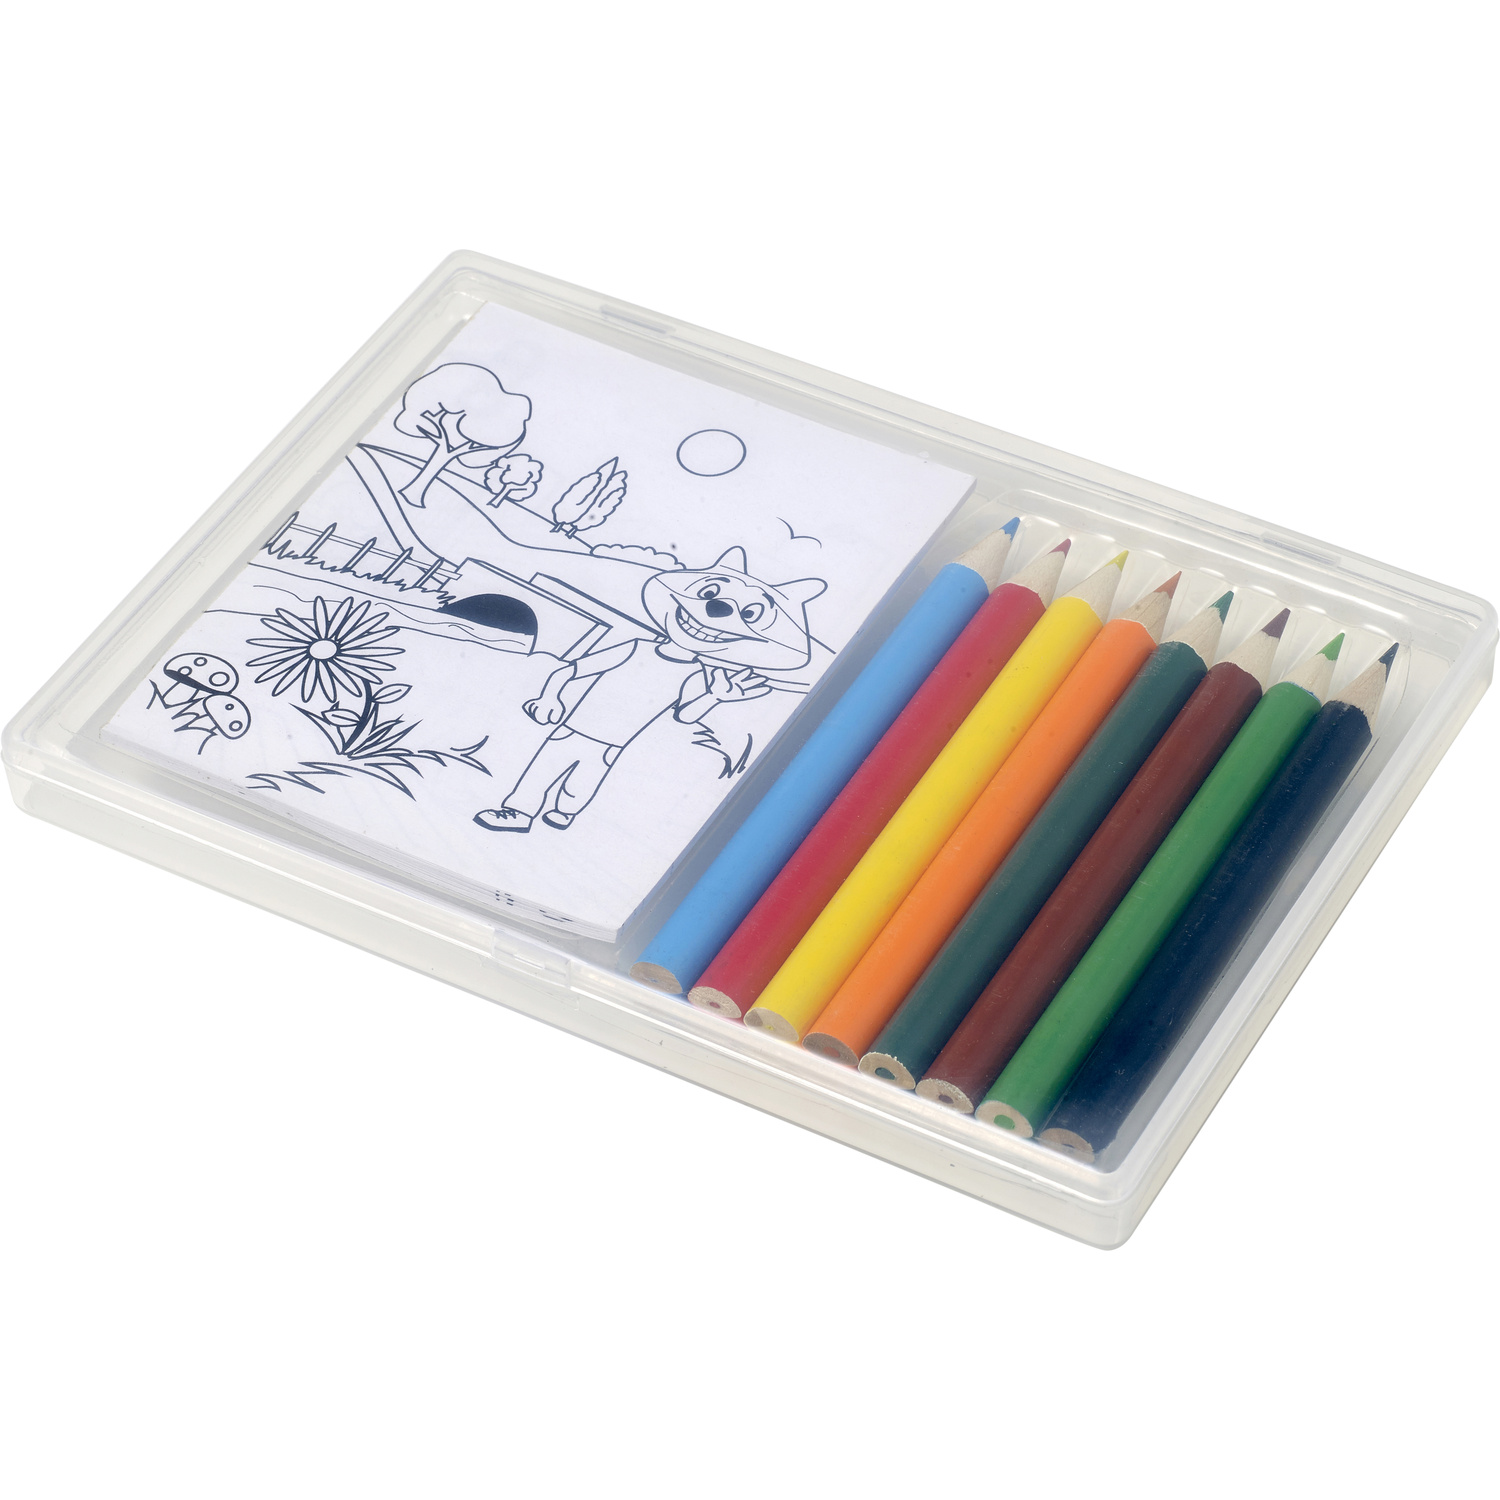 007788 021999999 3d045 gbc pro01 fal - Pencils and colouring sheets